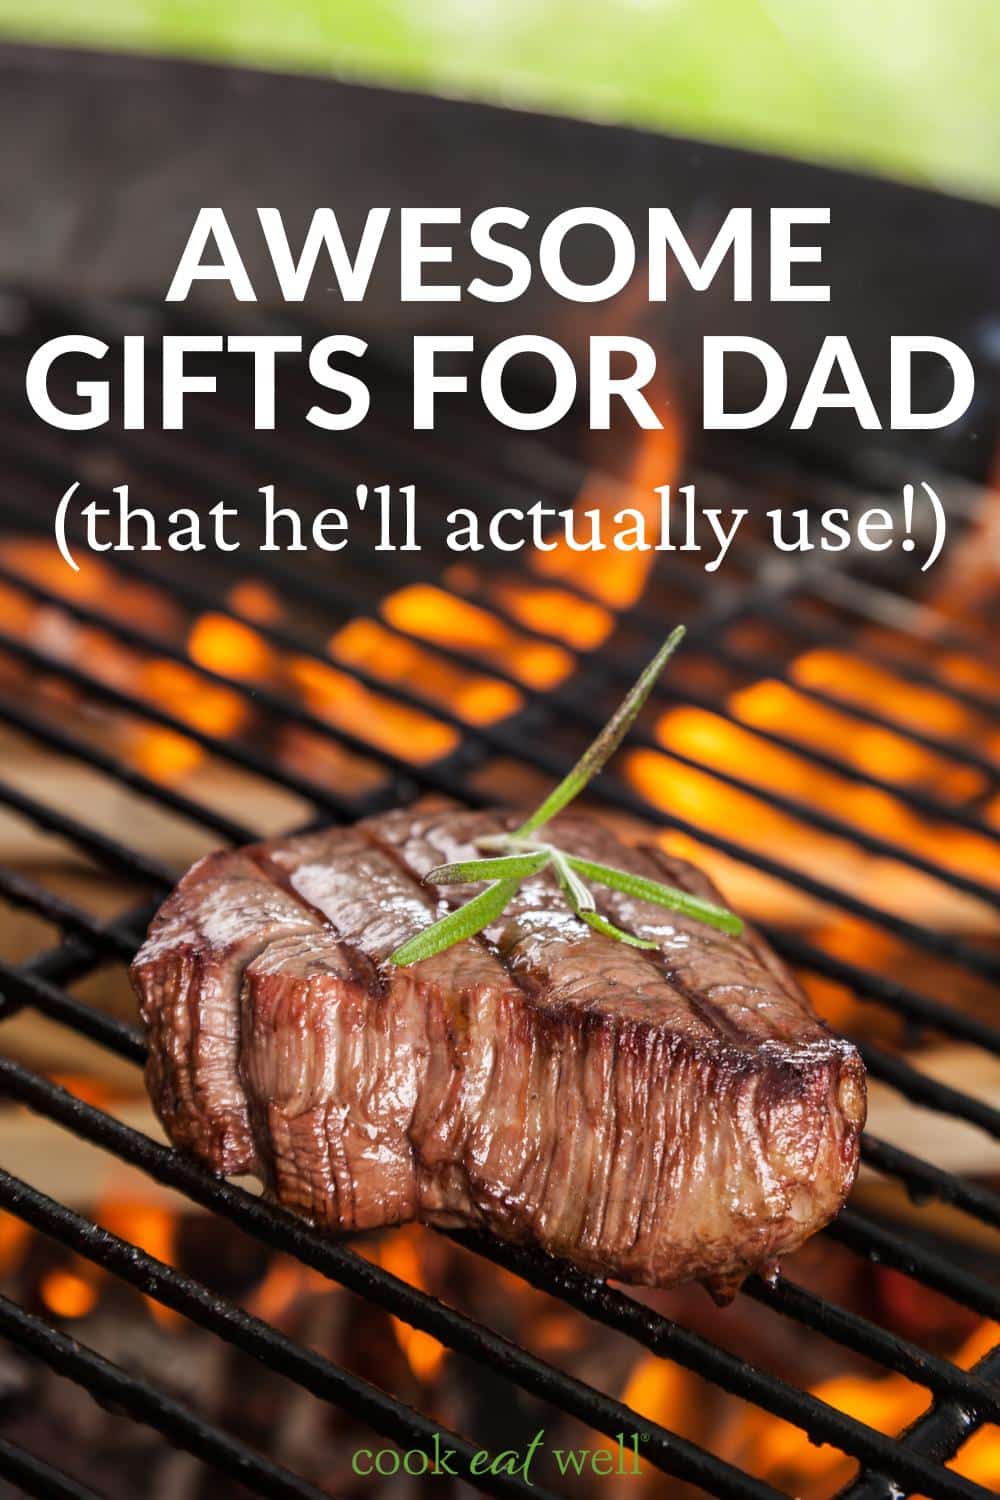 Awesome gifts for dad (that he'll actually use!)